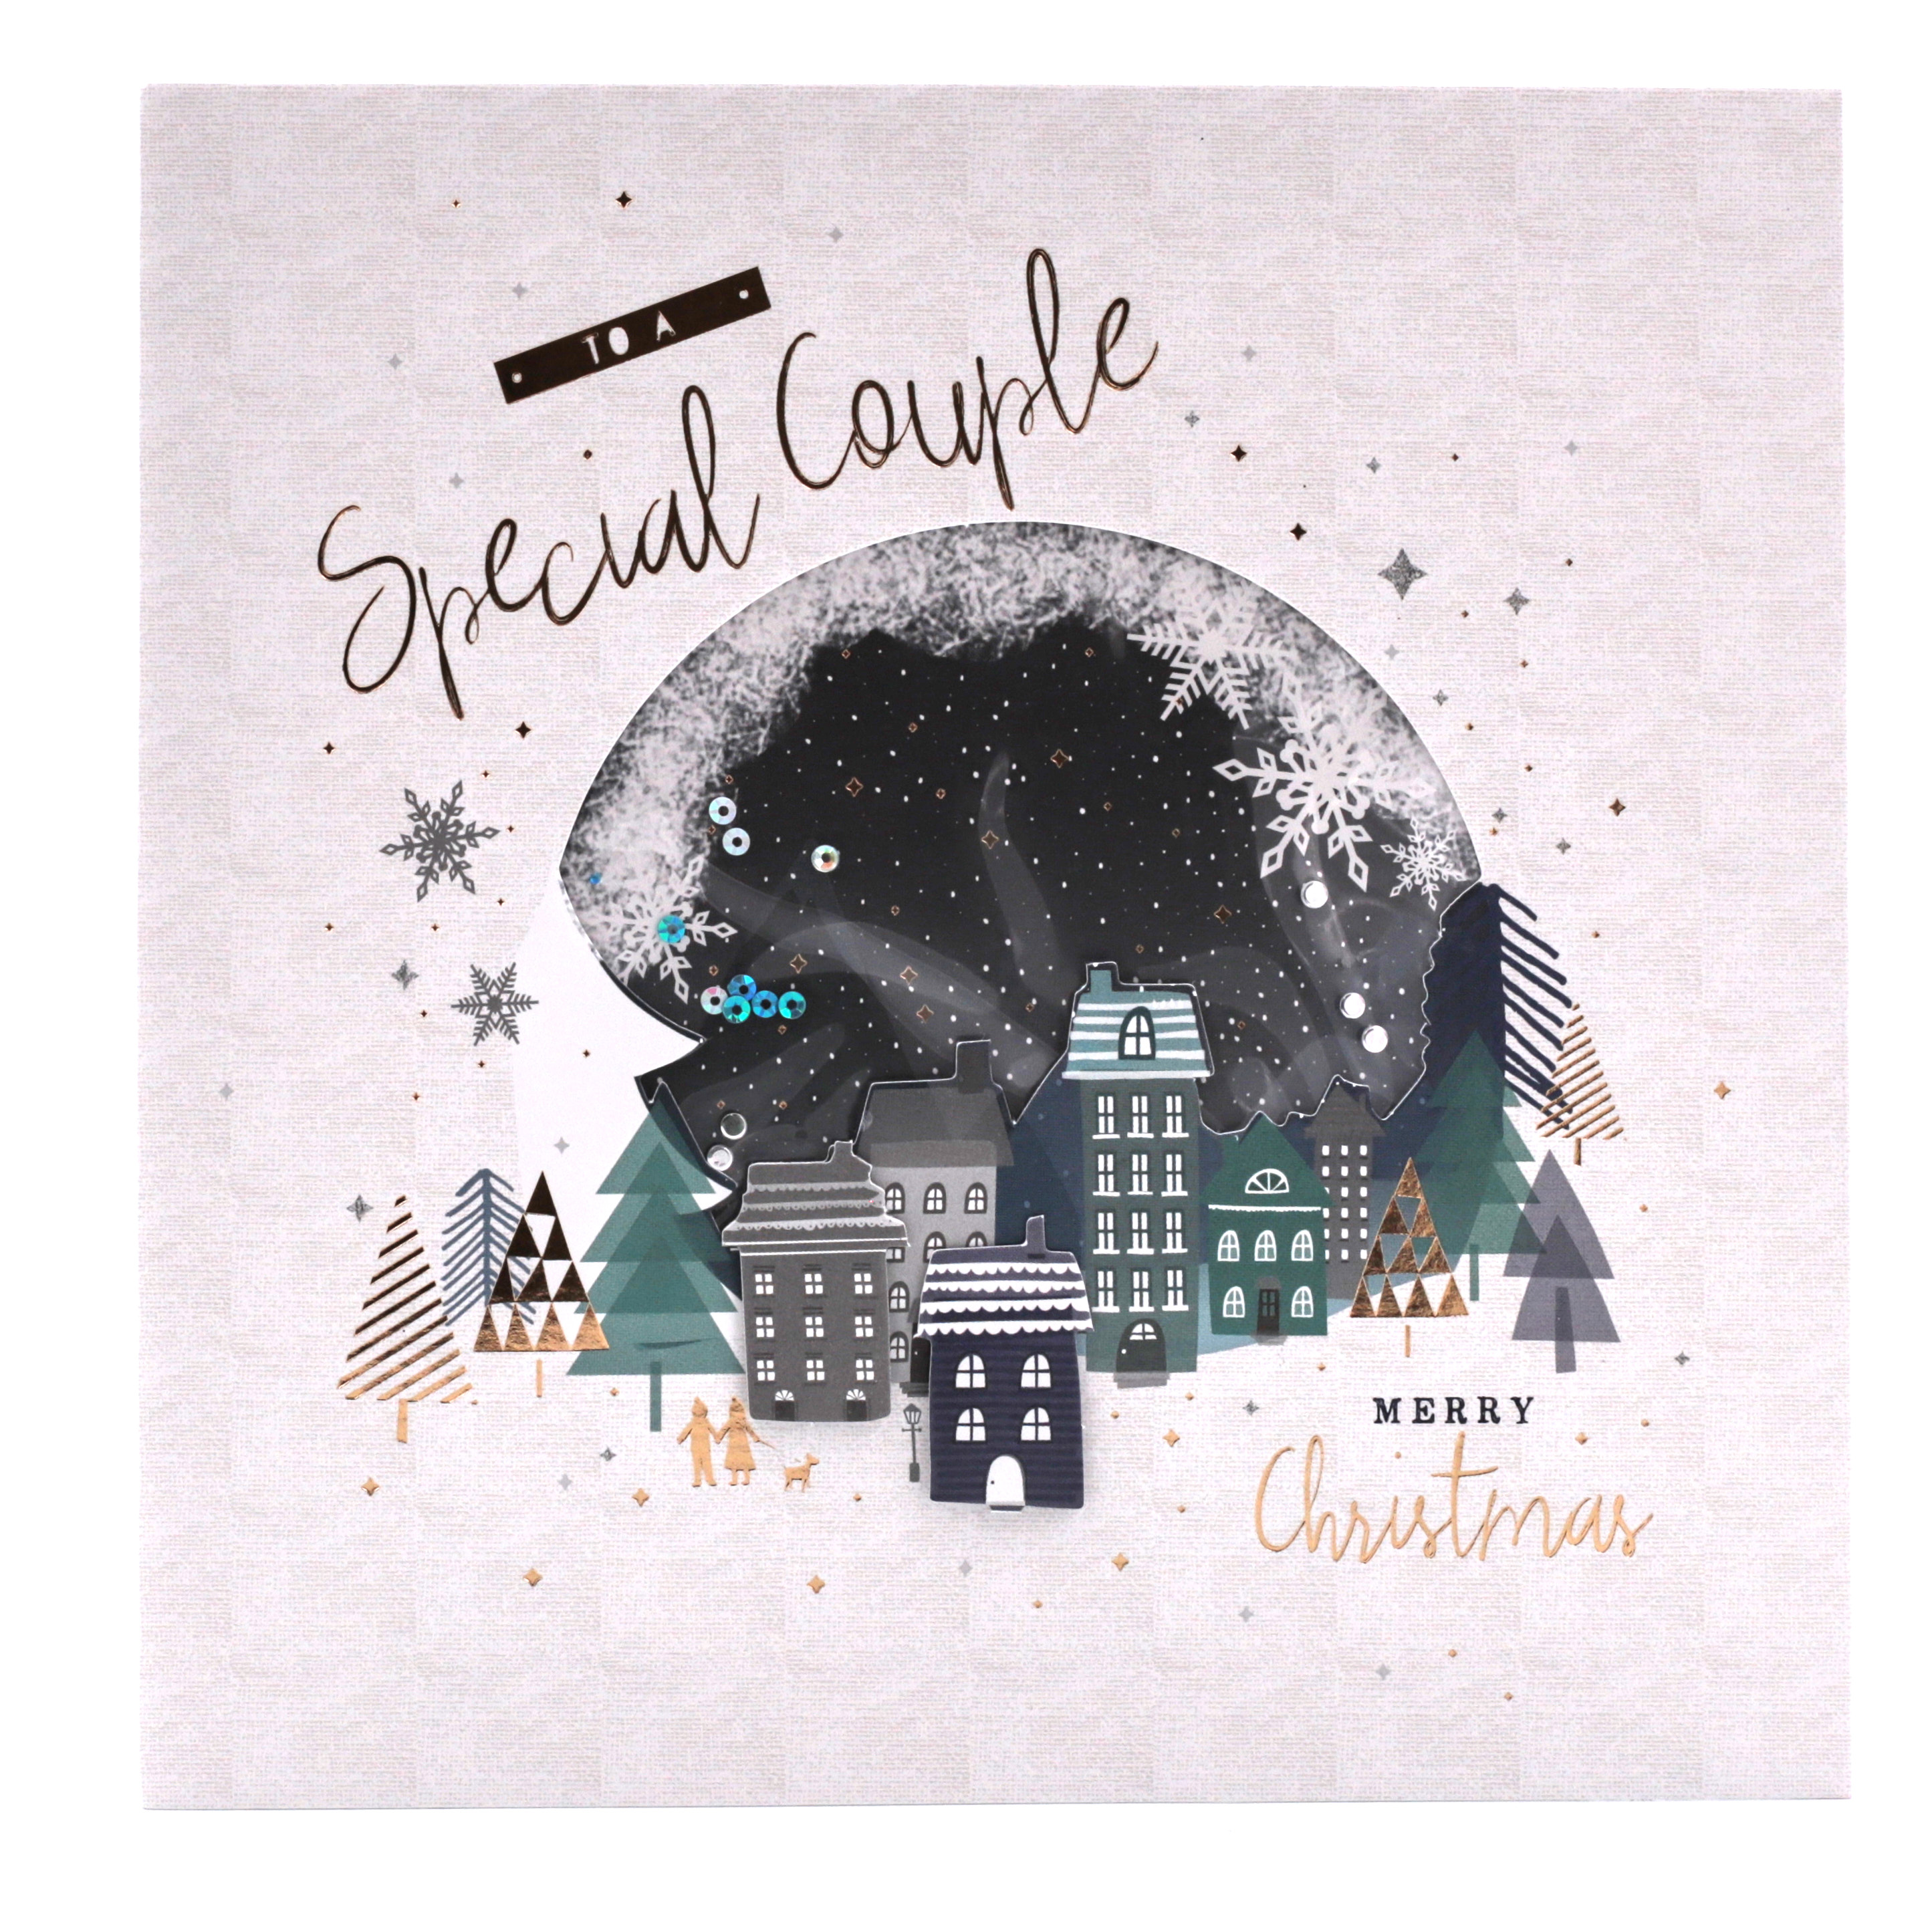 Exquisite Collection Christmas Card - Special Couple, Magical Snowglobe